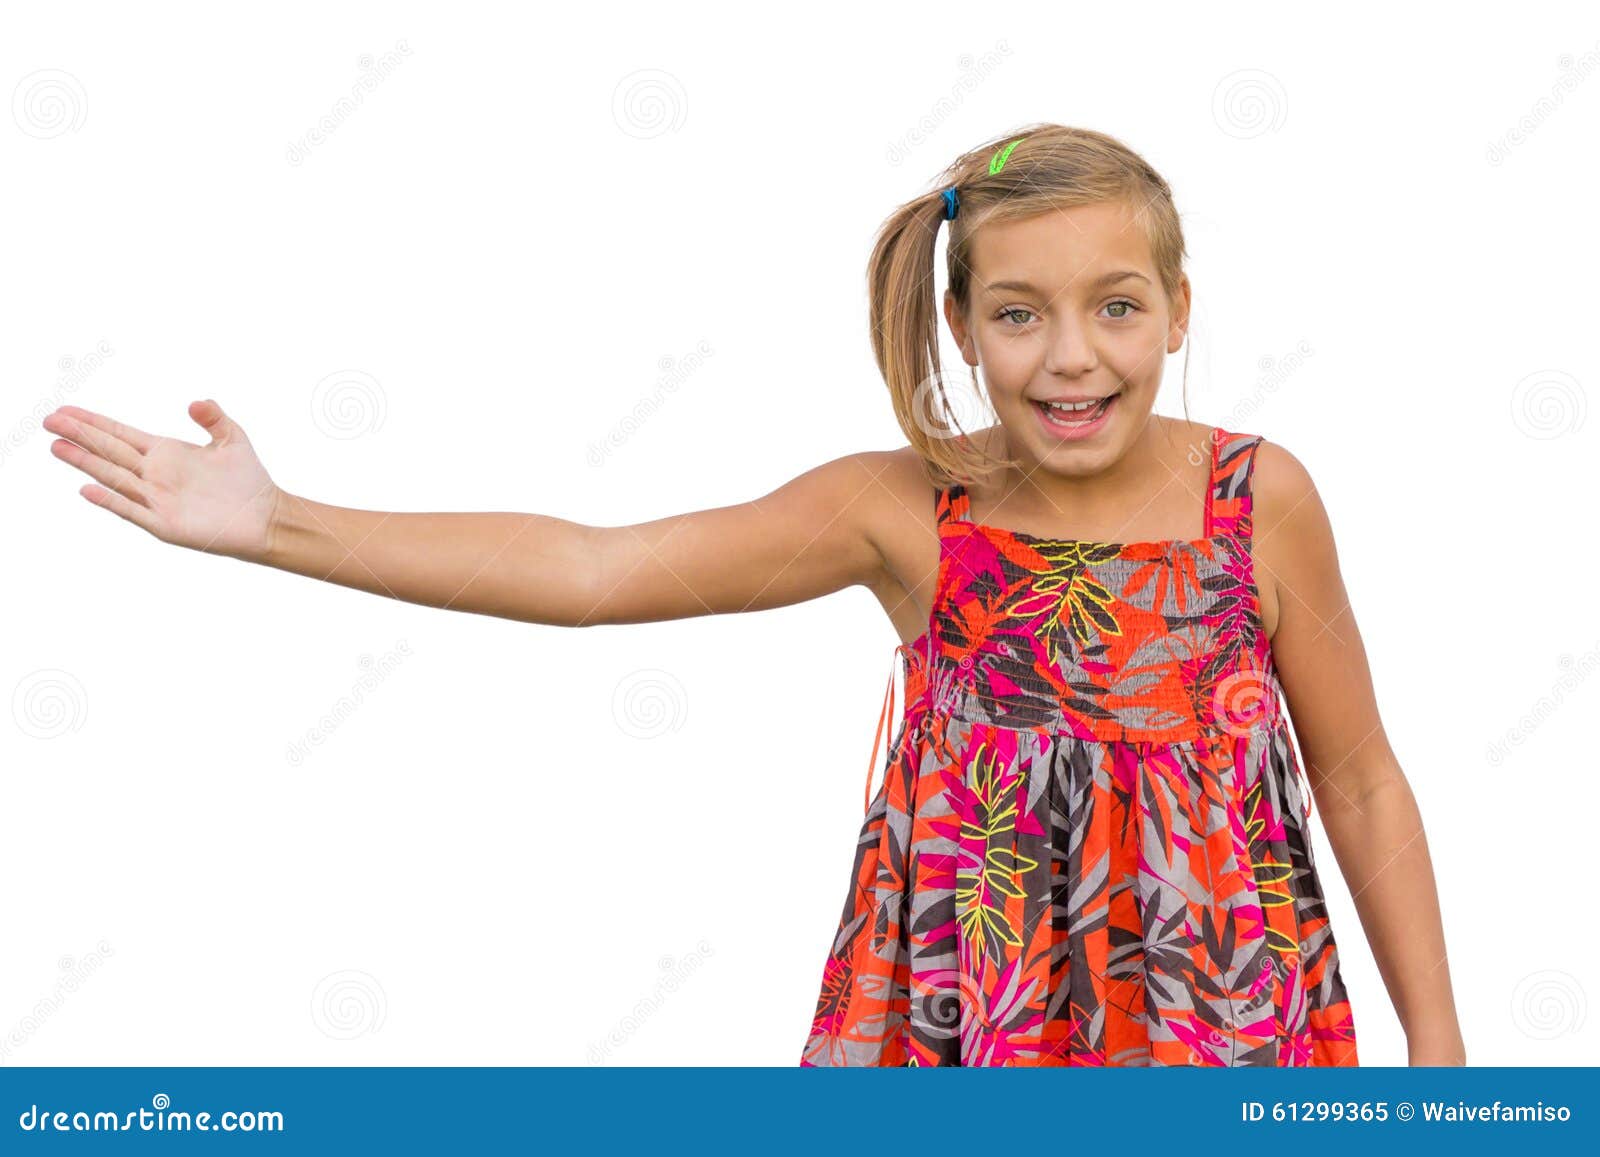 gesticulating child girl excited expression